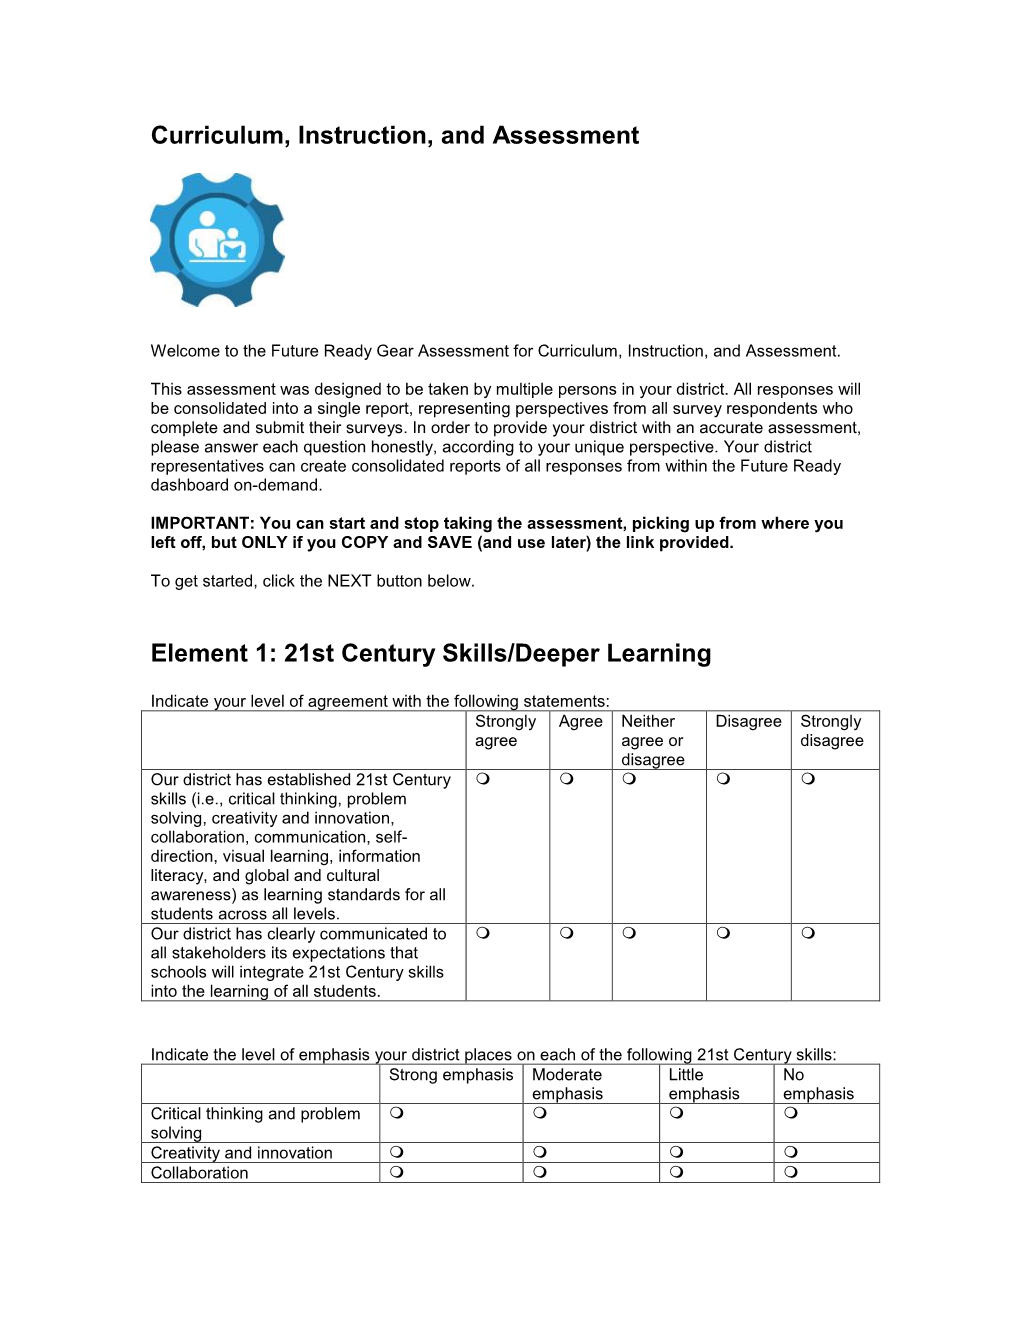 Curriculum, Instruction, and Assessment Element 1: 21St Century Skills/Deeper Learning